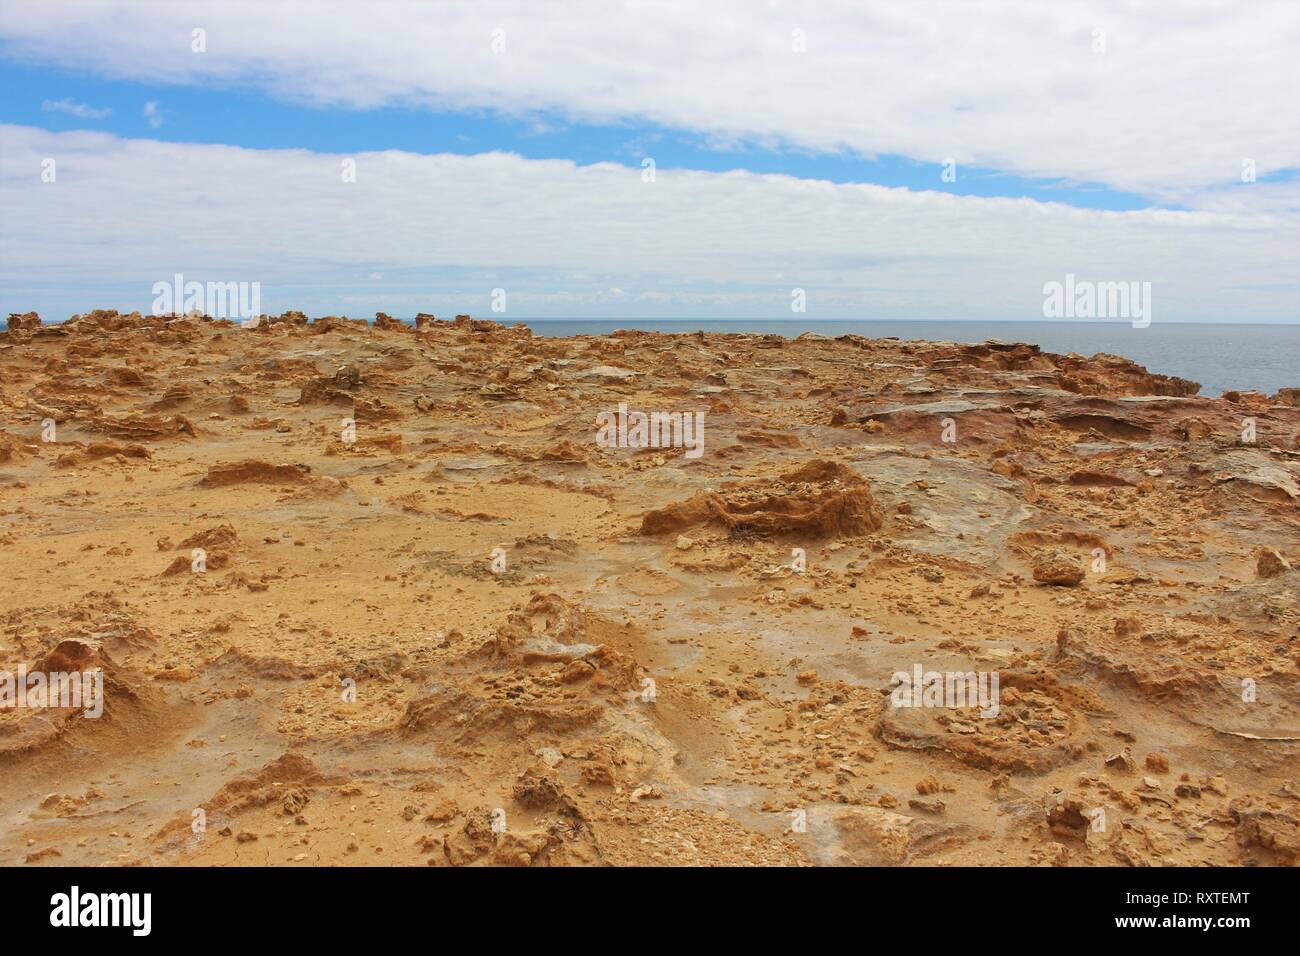 Barren dusty rock formations at the petrified forest on the south coast of Australia, with the ocean in the background. Stock Photo